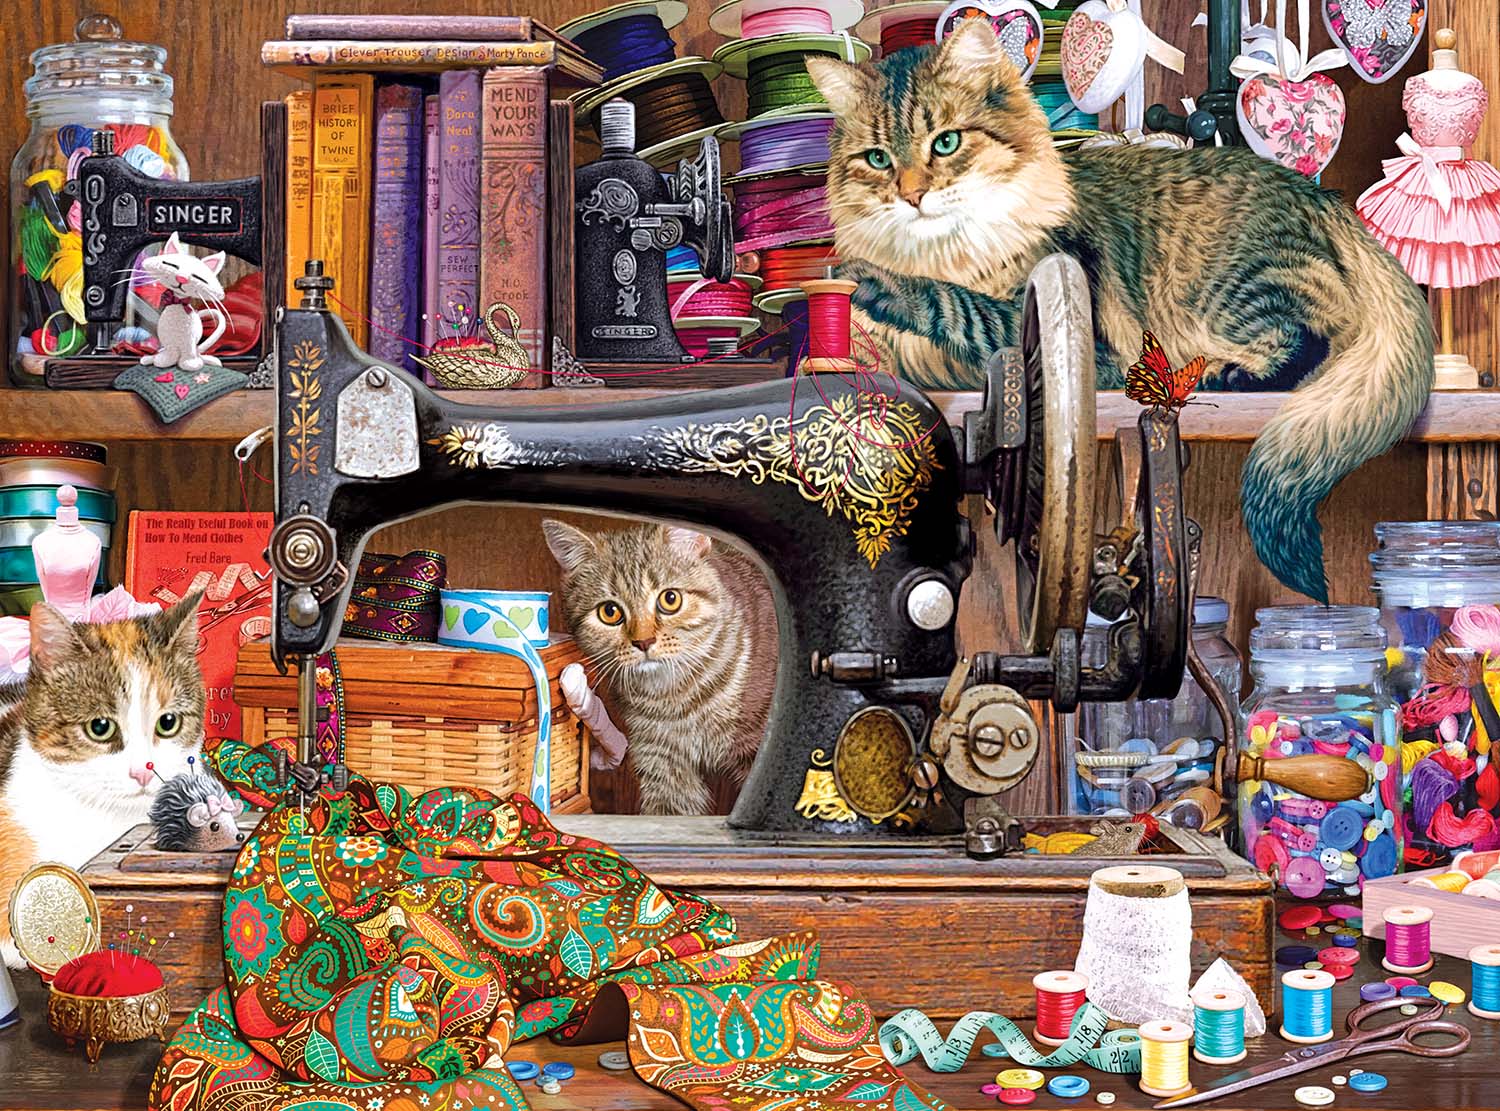 Sewing Room Cats Quilting & Crafts Jigsaw Puzzle